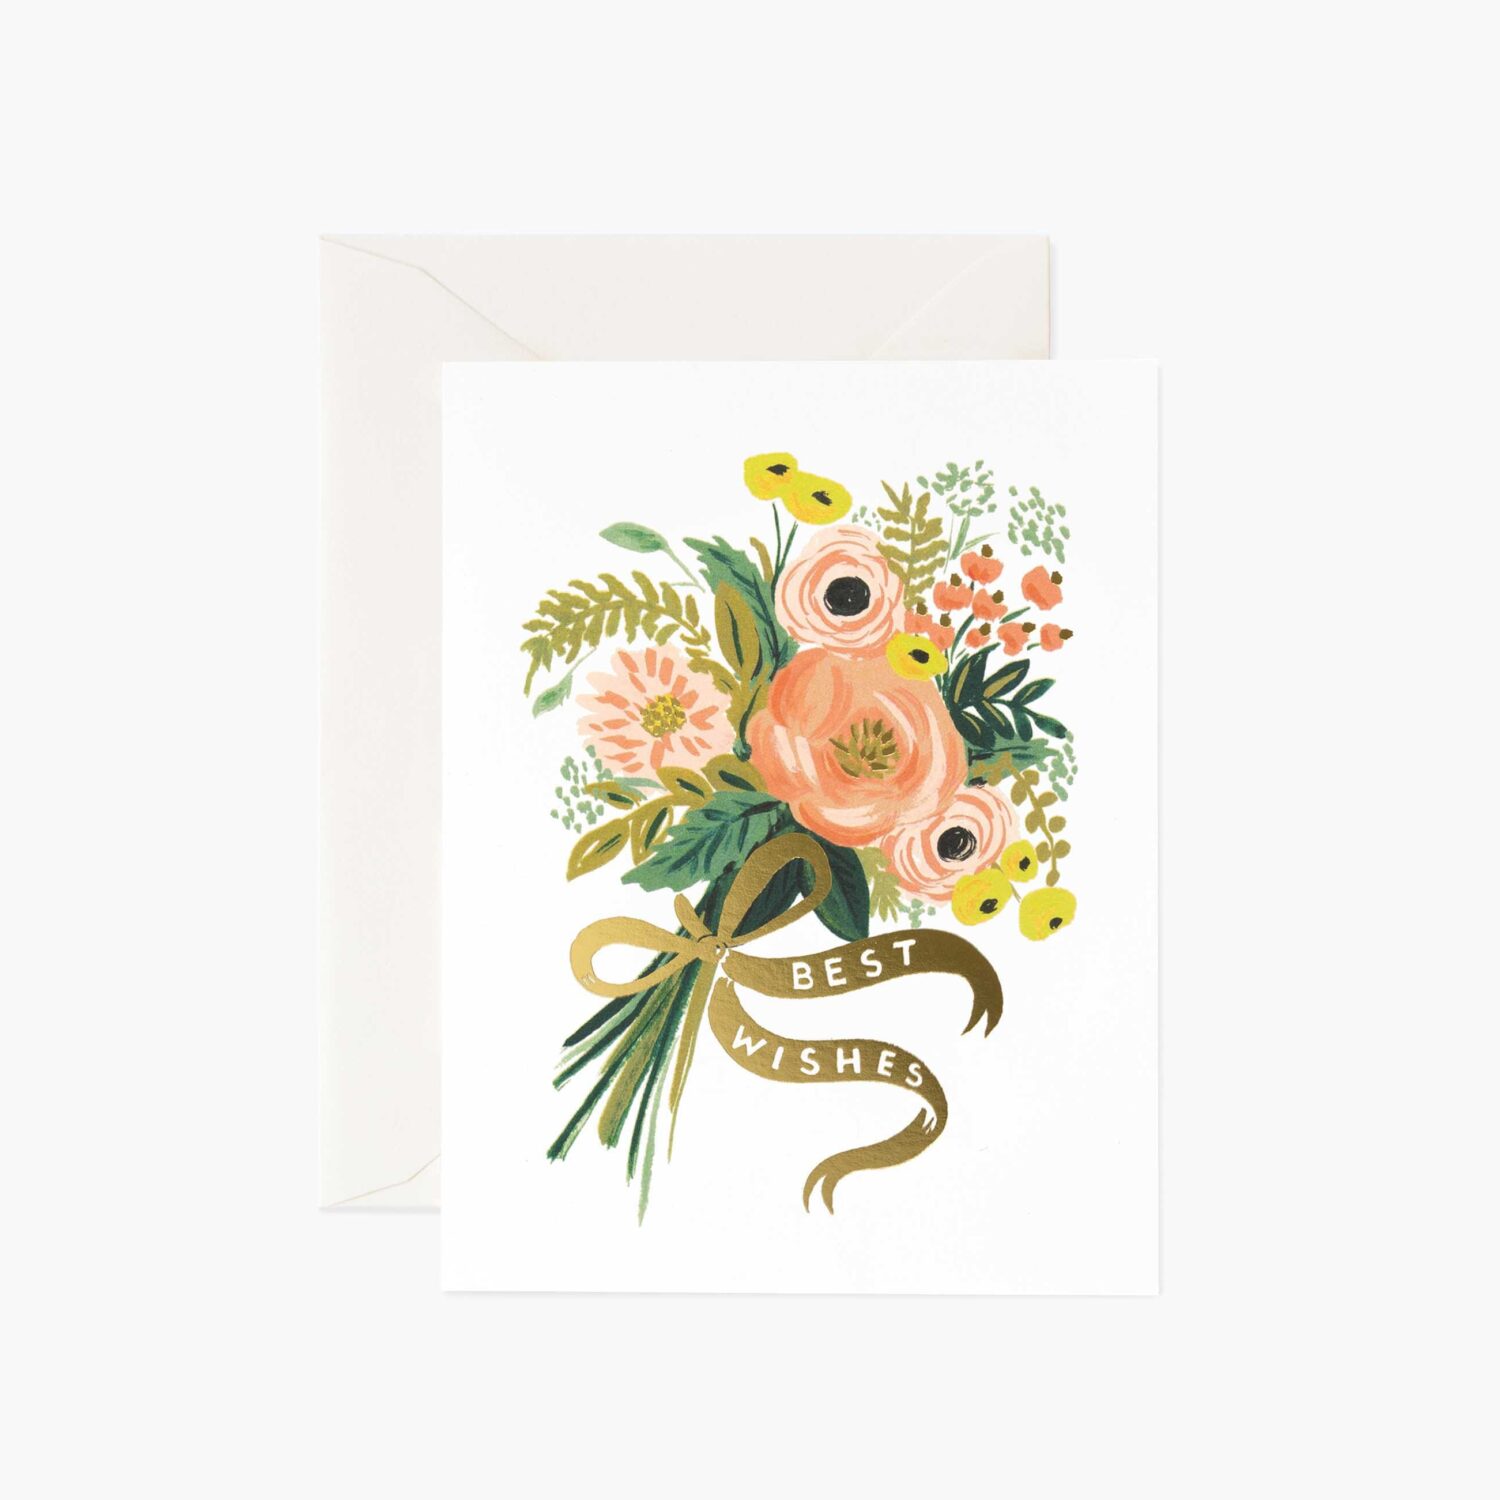 Rifle Paper Co. "Best Wishes Bouquet" Greeting Card